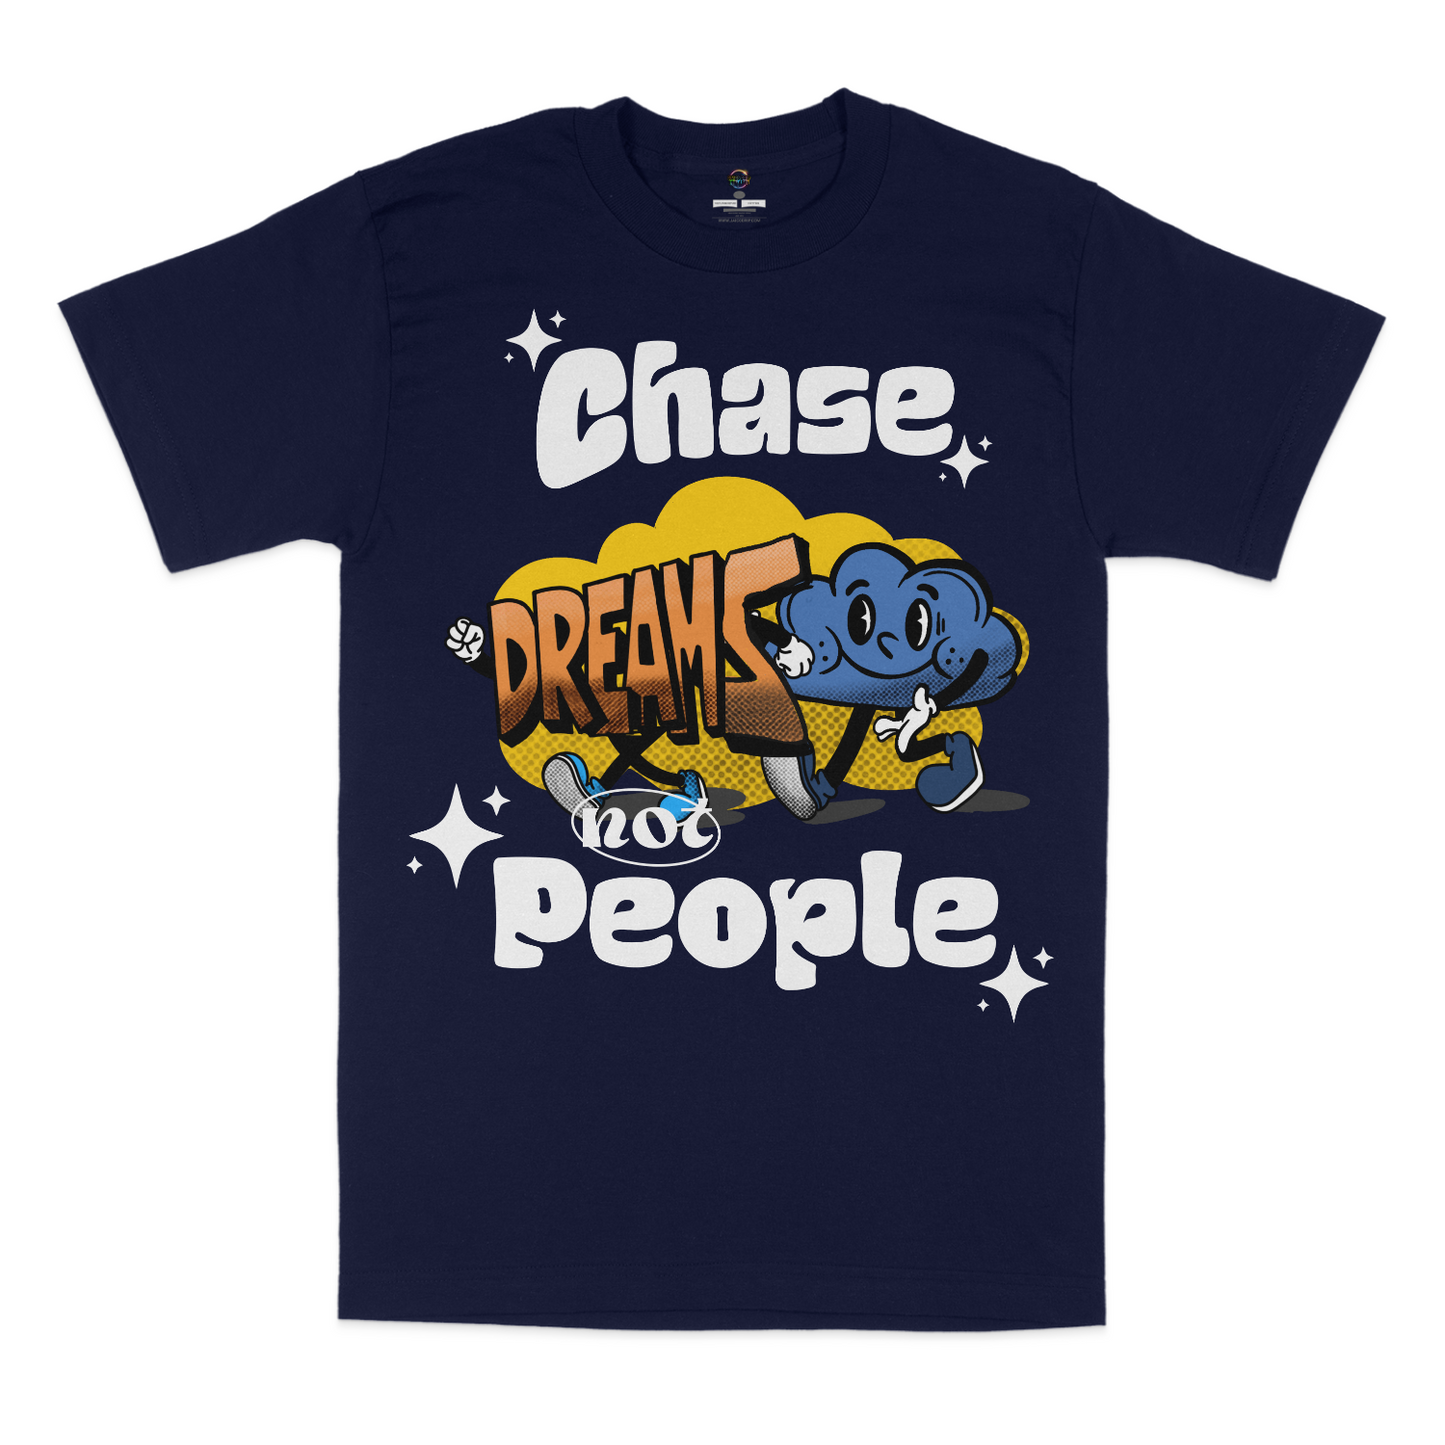 Chase Dreams Not People Graphic Unisex T-shirt